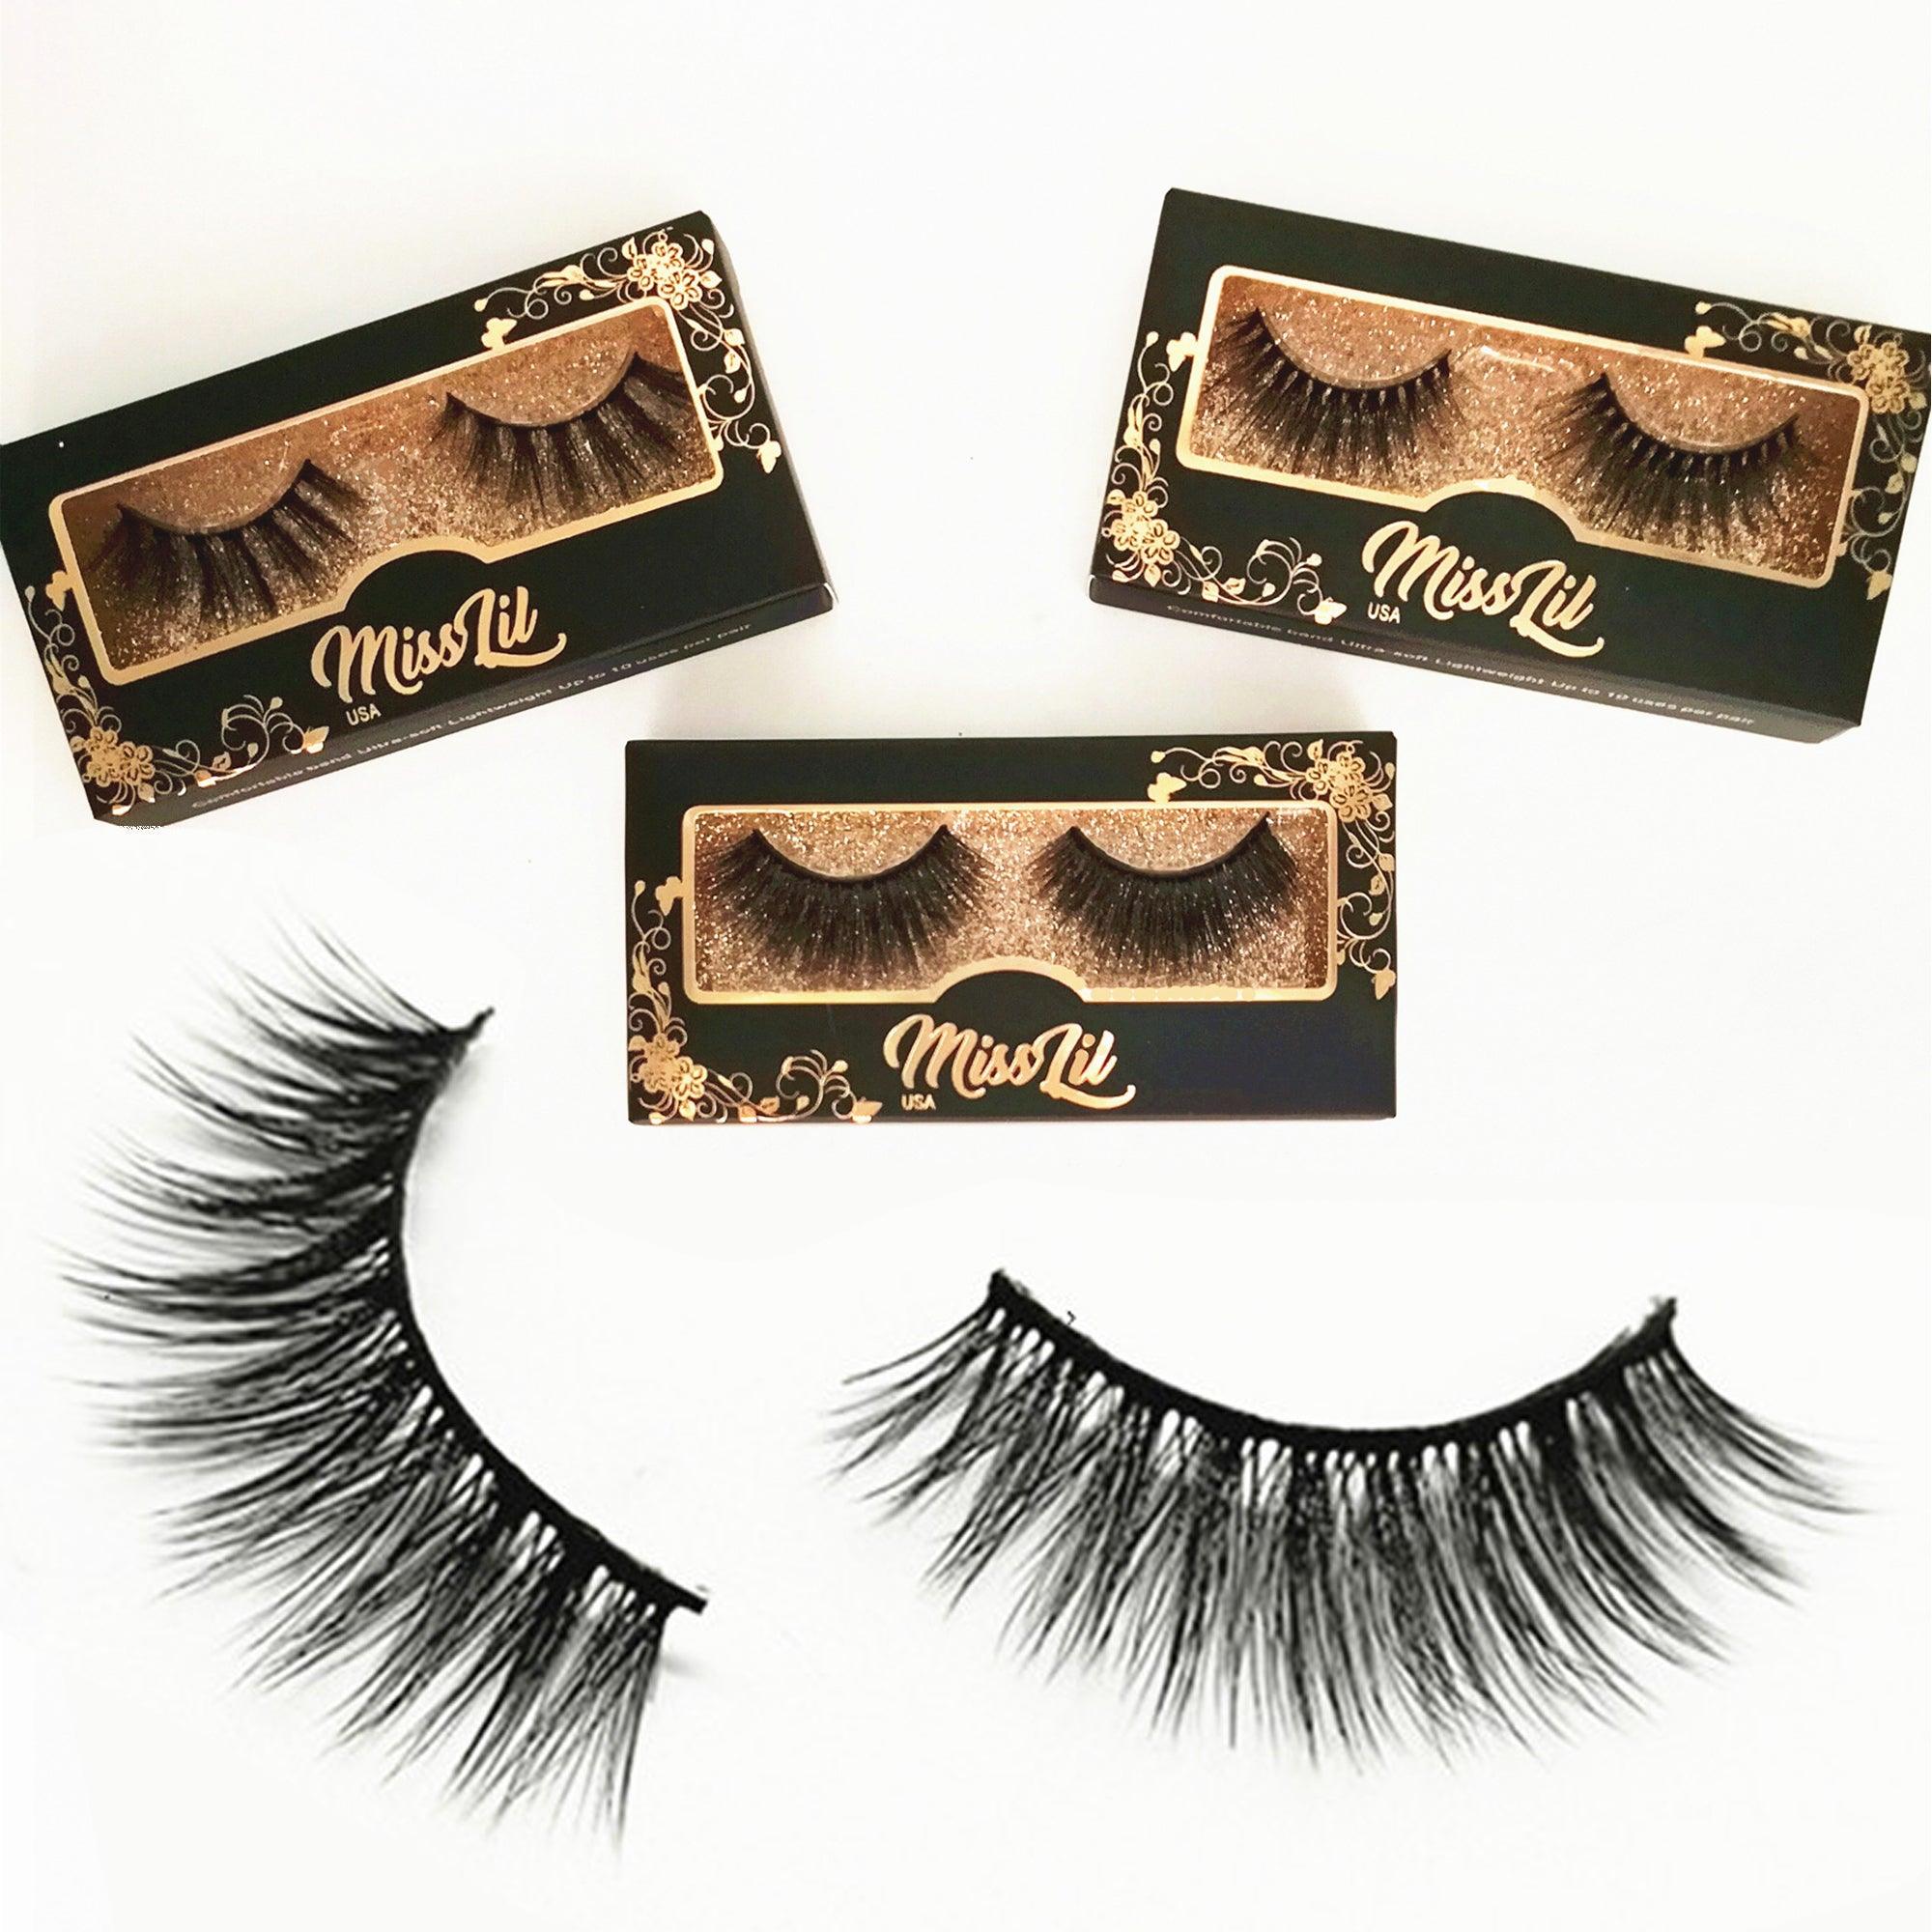 1-Pair Miss Lil USA Lashes #23 (Pack of 12) - Miss Lil USA Wholesale